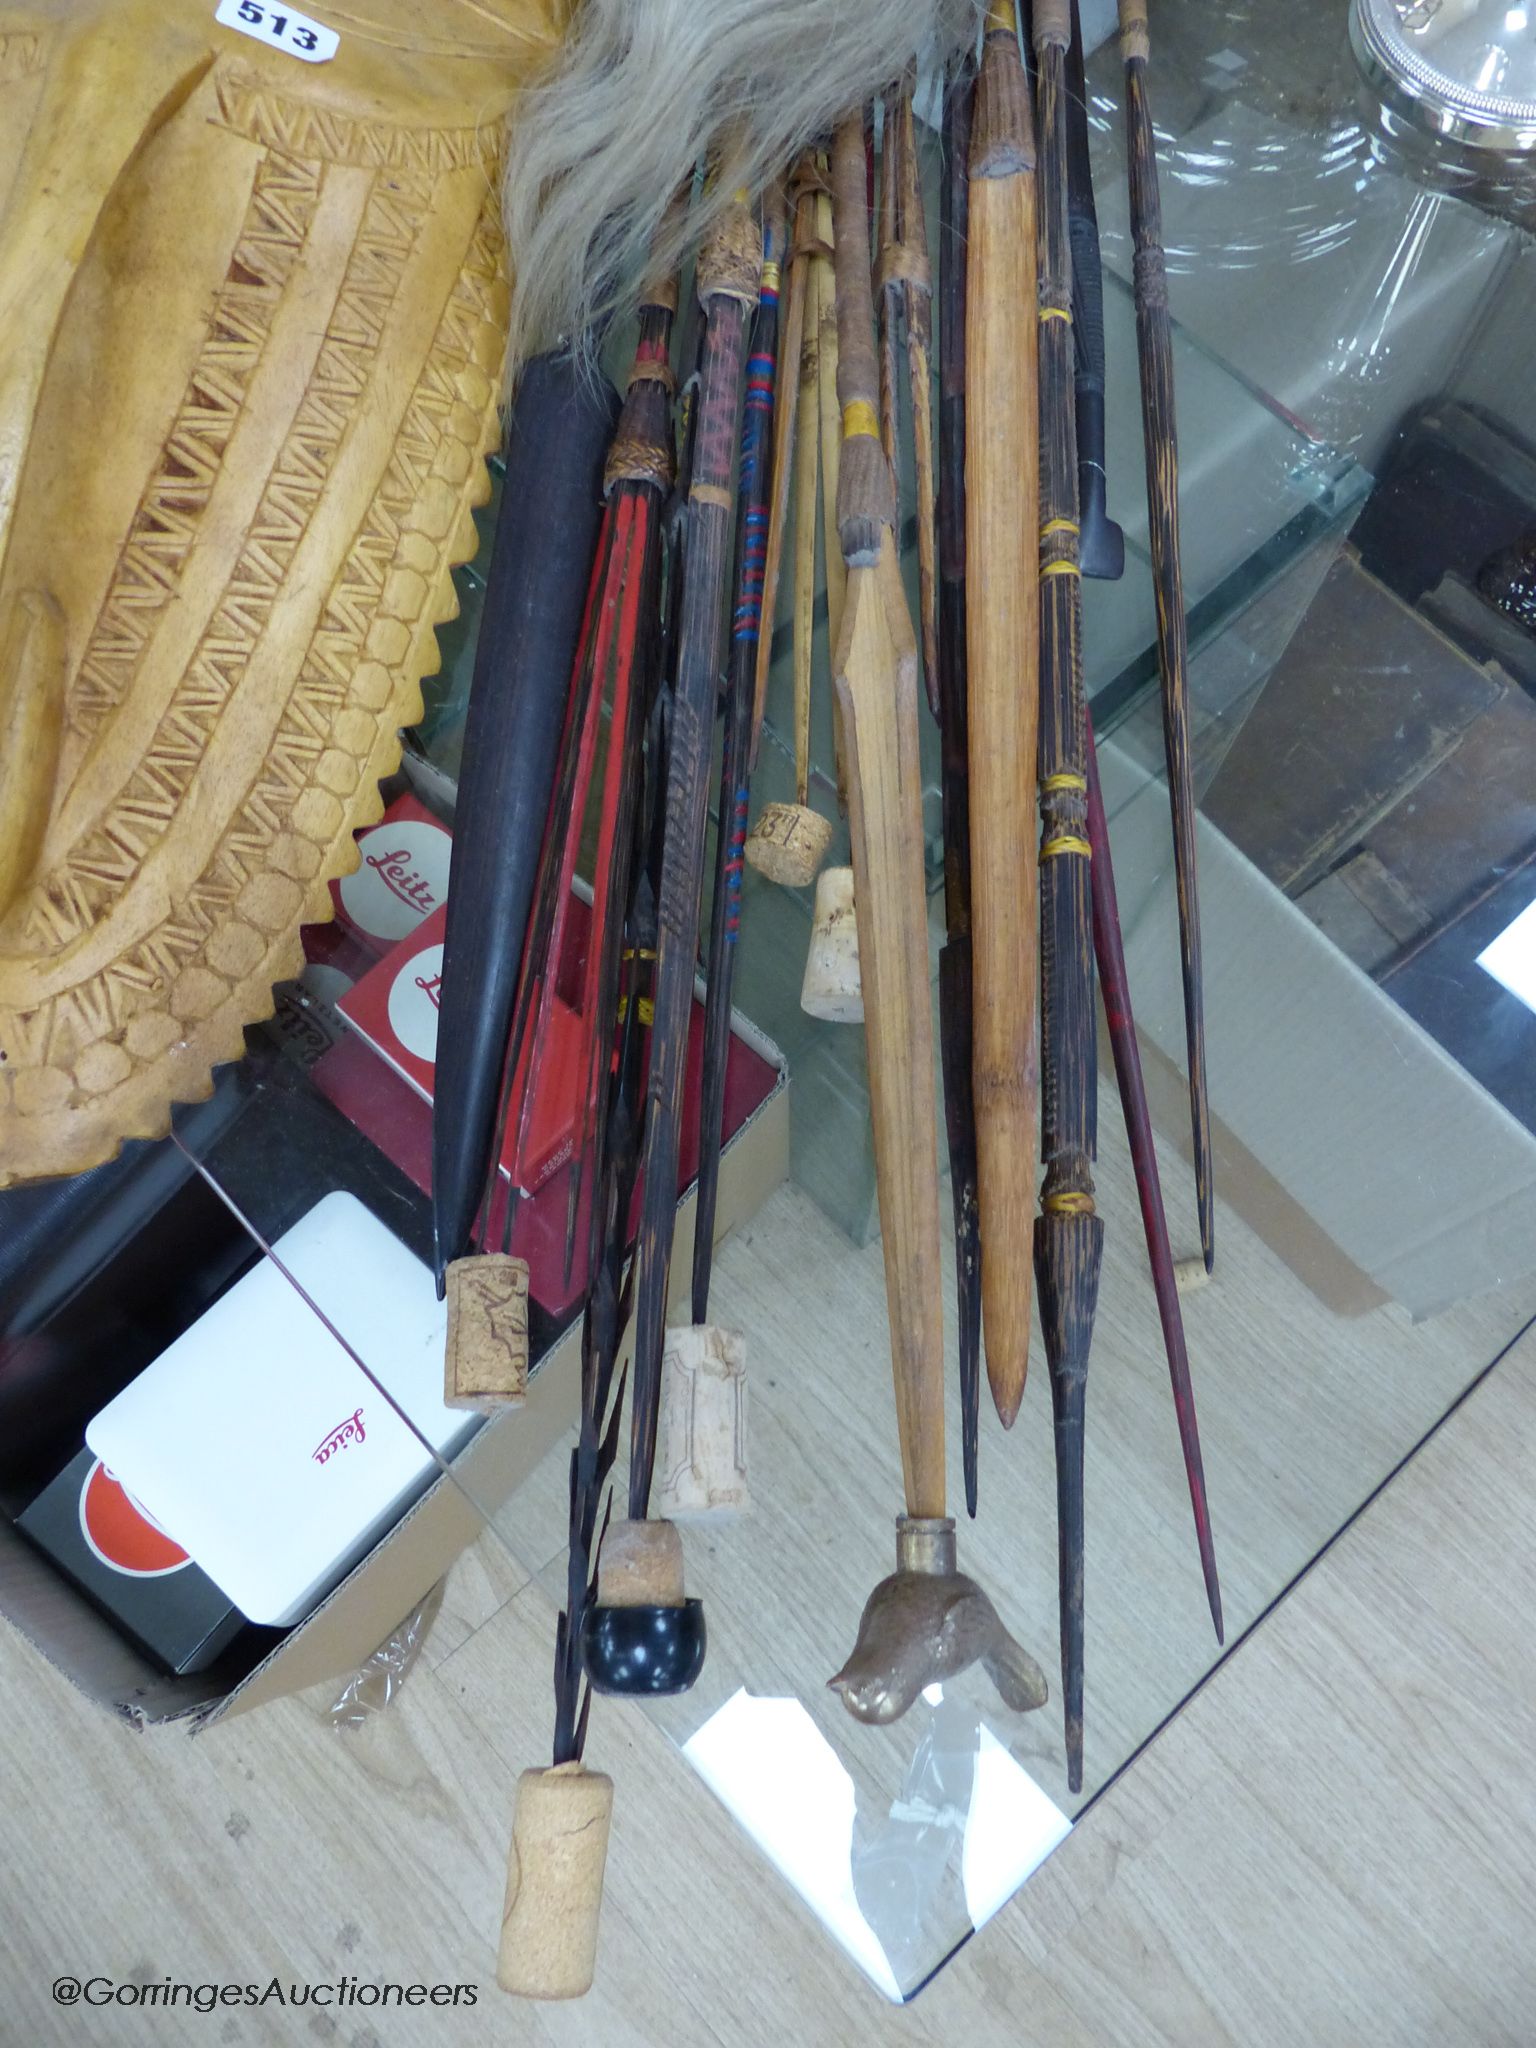 A collection of Tribal style spears etc and a mask